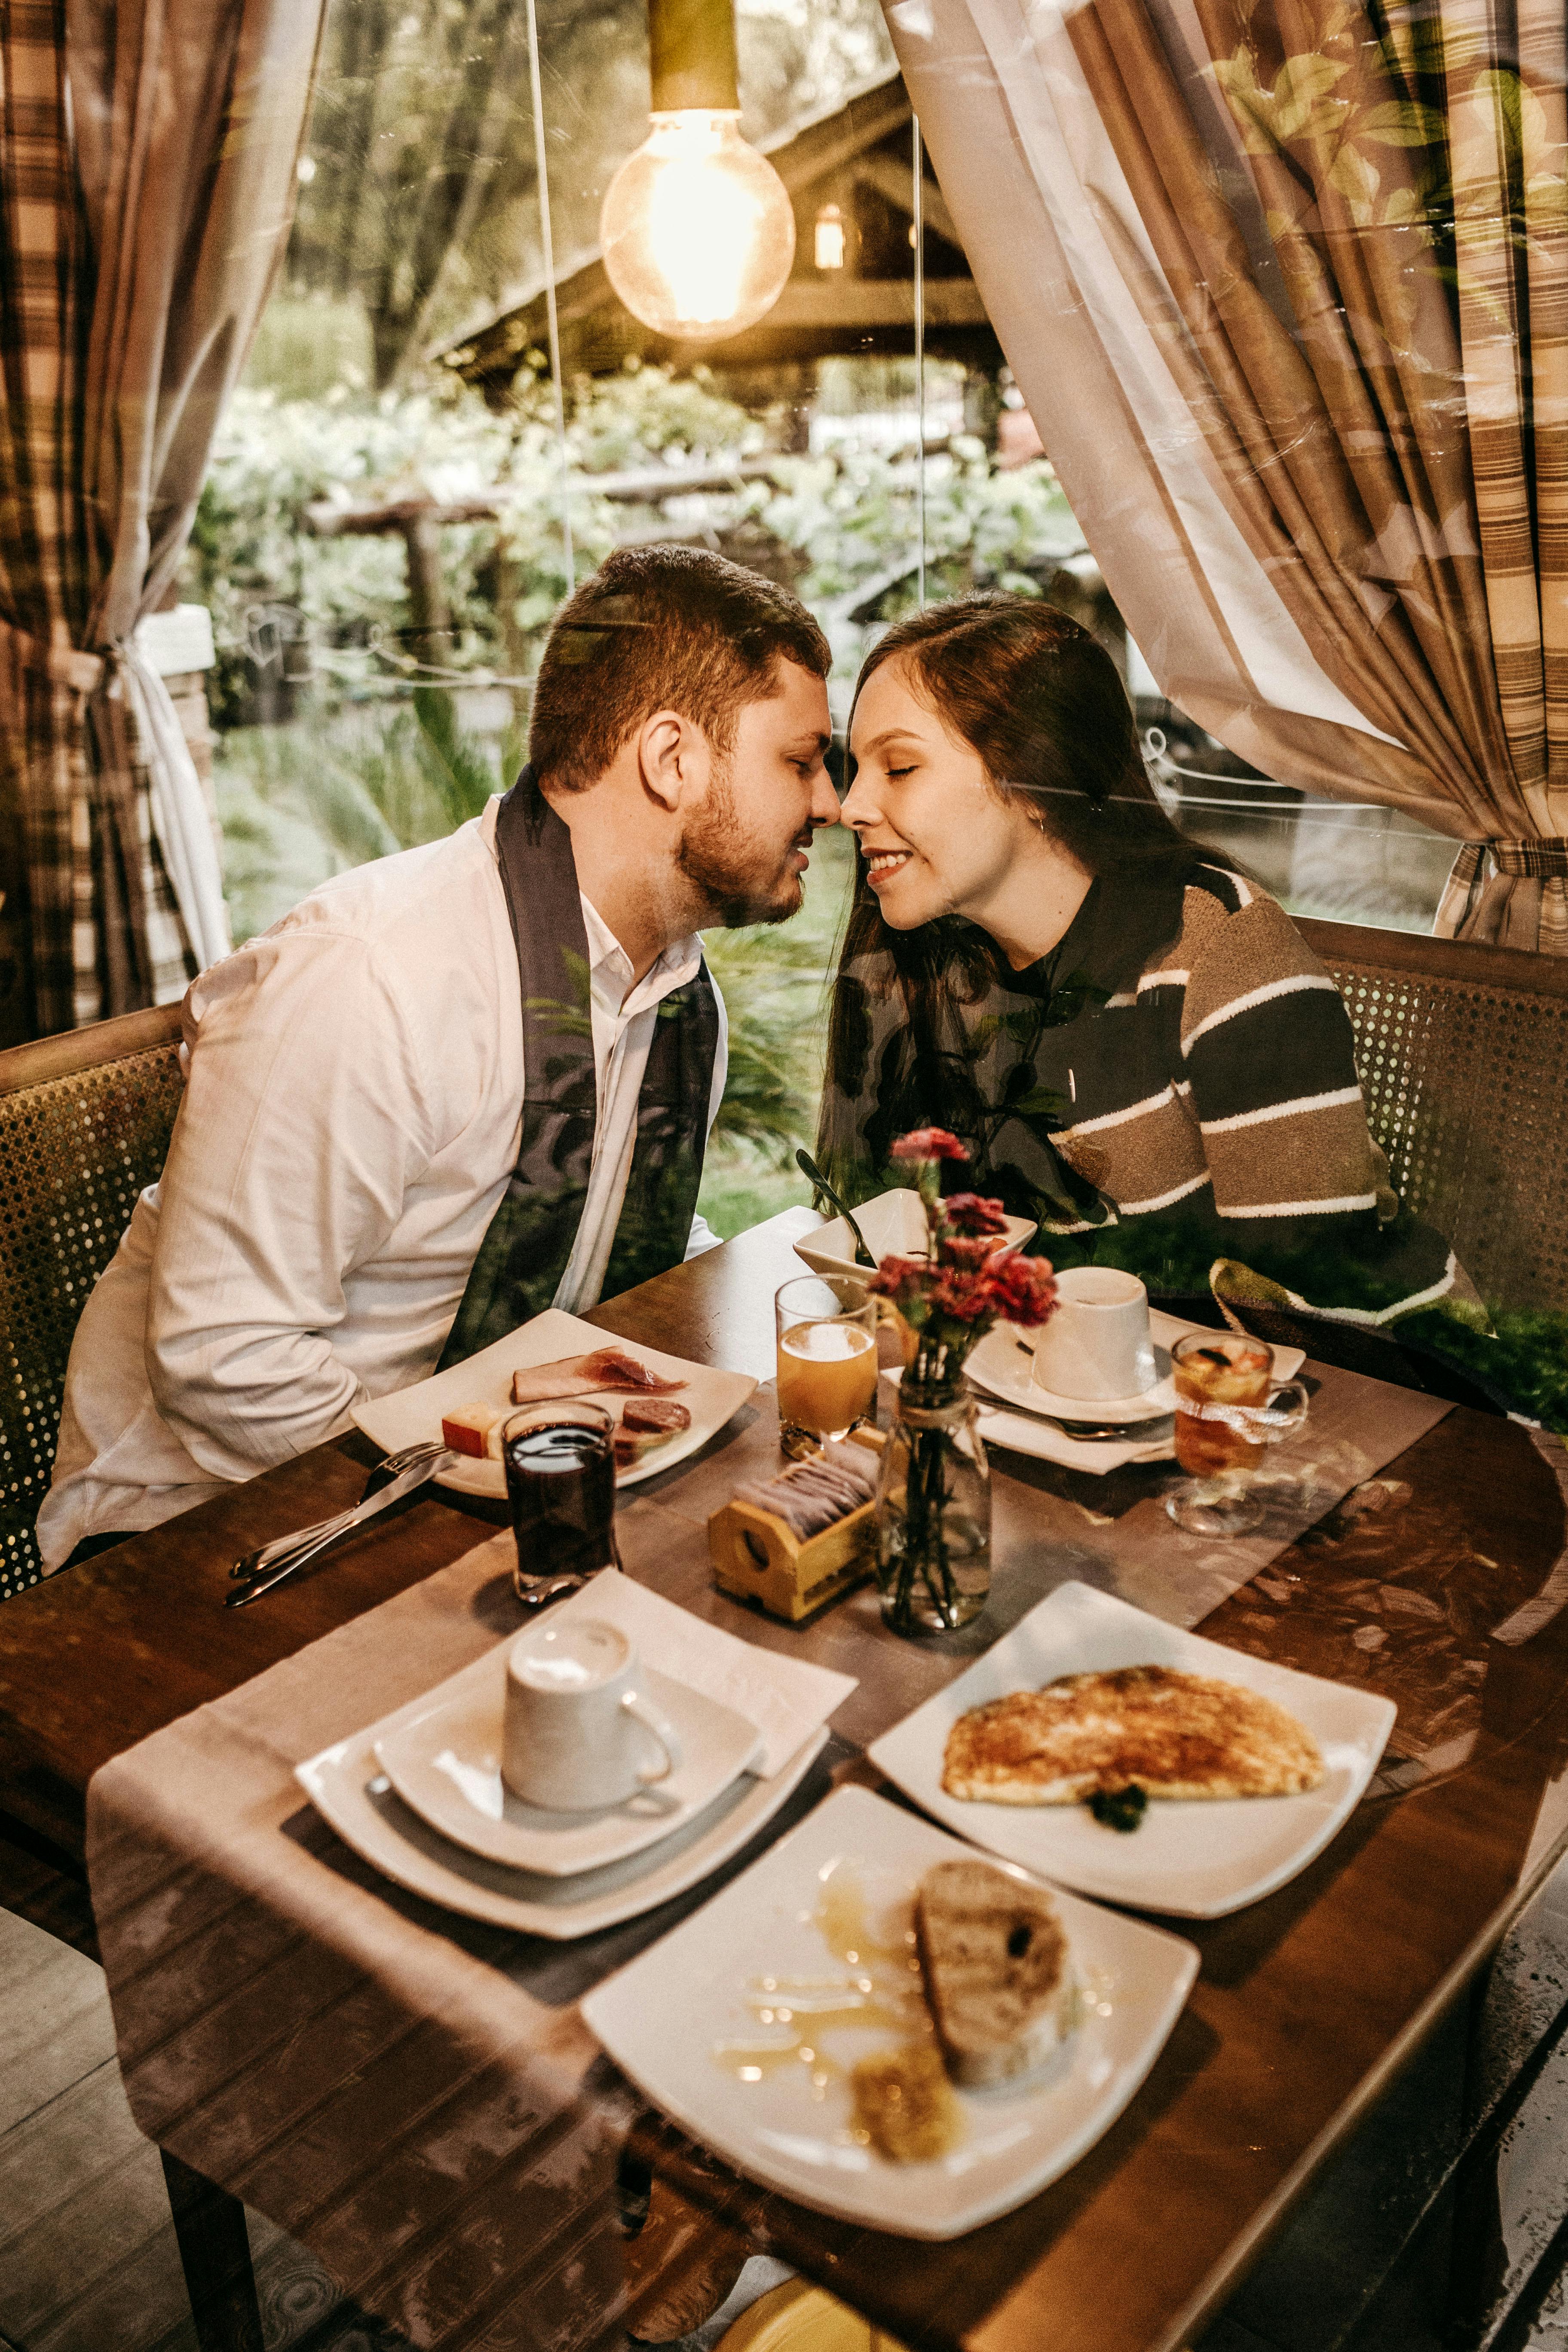 A couple about to kiss at a restaurant | Source: Pexels